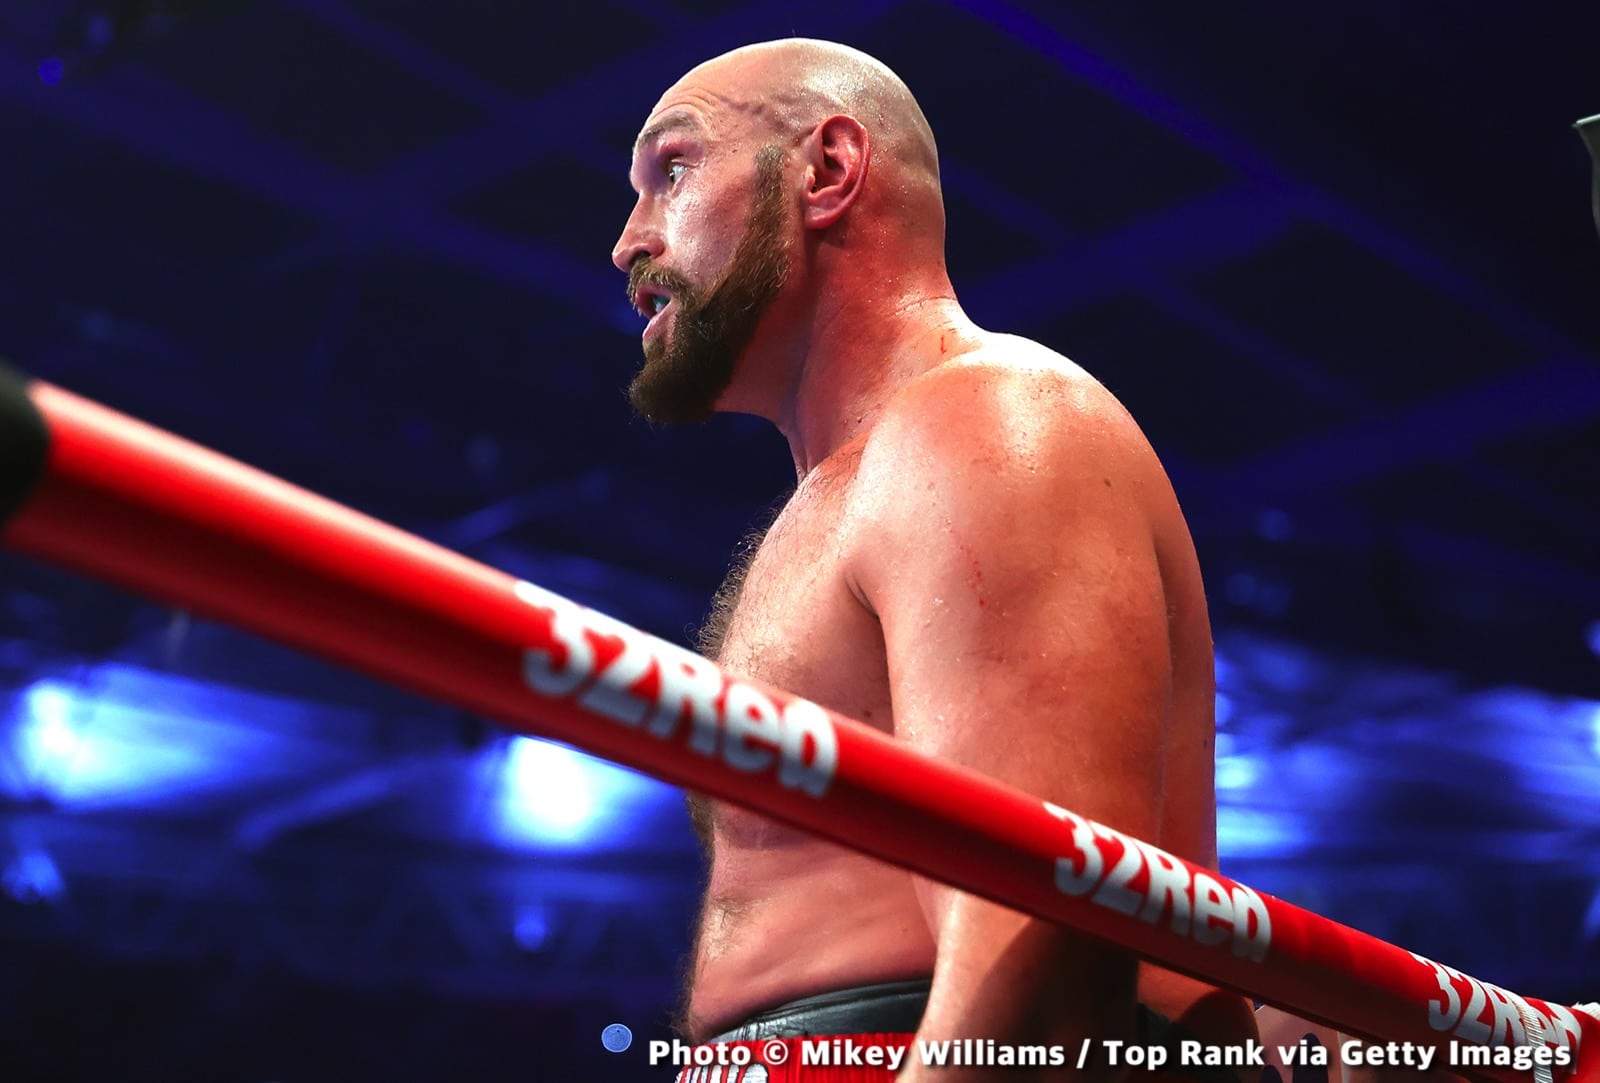 Image: Tyson Fury "piping up because Anthony Joshua fighting" in 2 weeks says Eddie Hearn